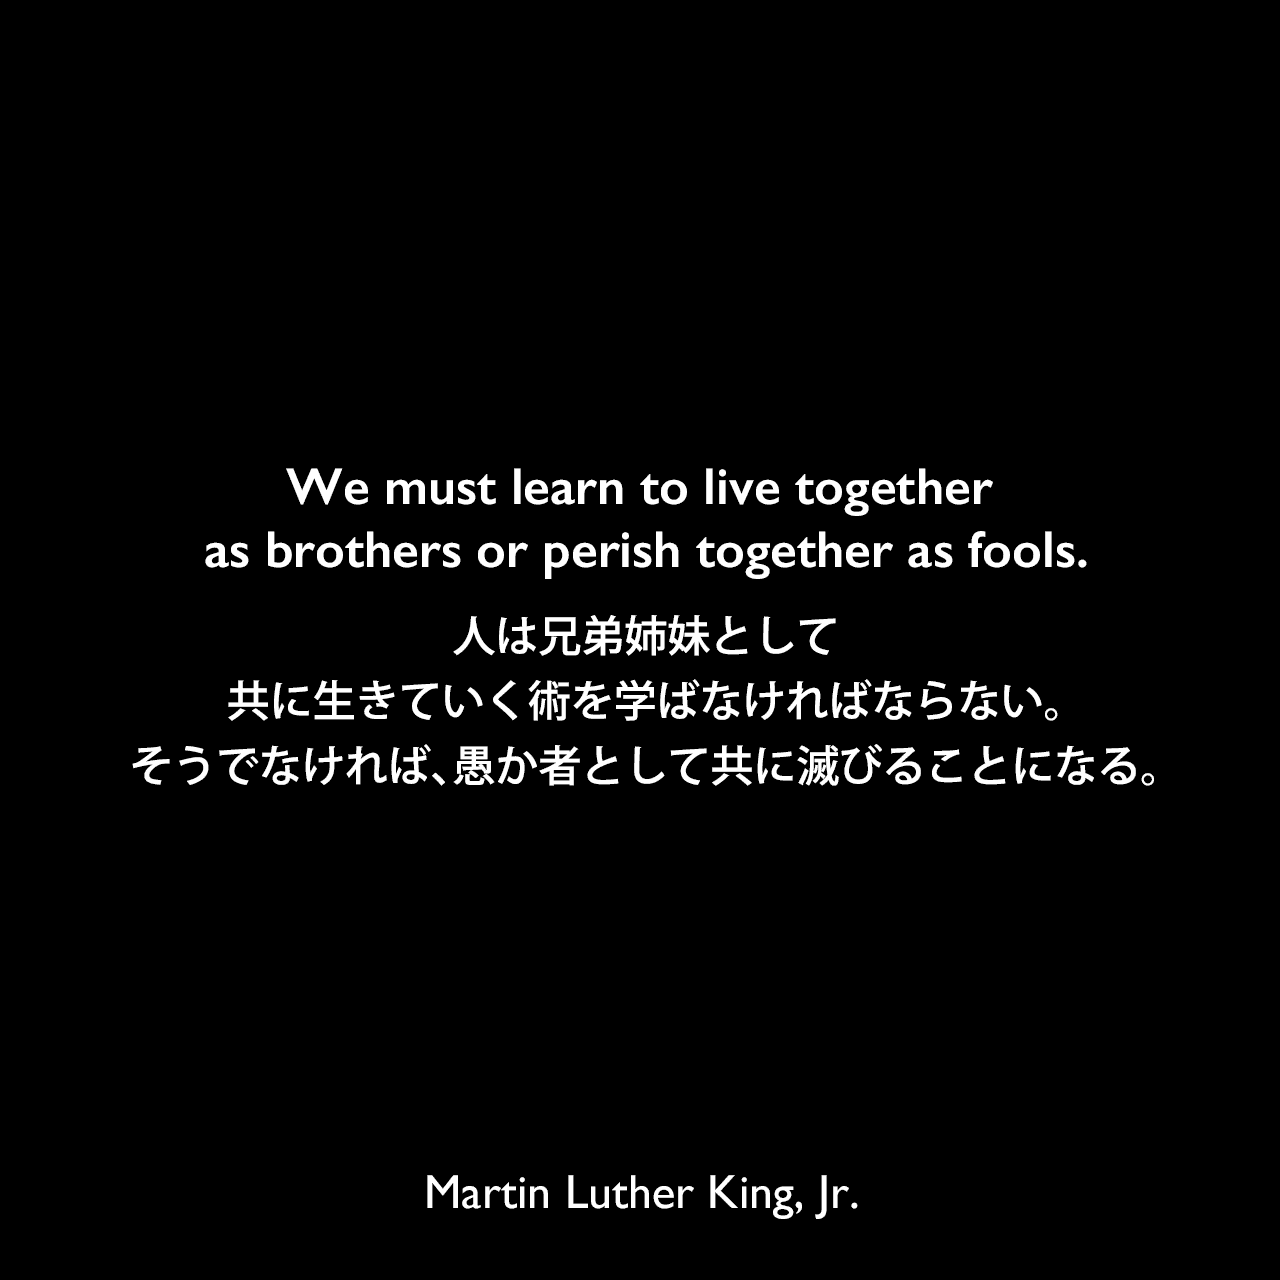 We must learn to live together as brothers or perish together as fools.人は兄弟姉妹として、共に生きていく術を学ばなければならない。そうでなければ、愚か者として共に滅びることになる。Martin Luther King, Jr.